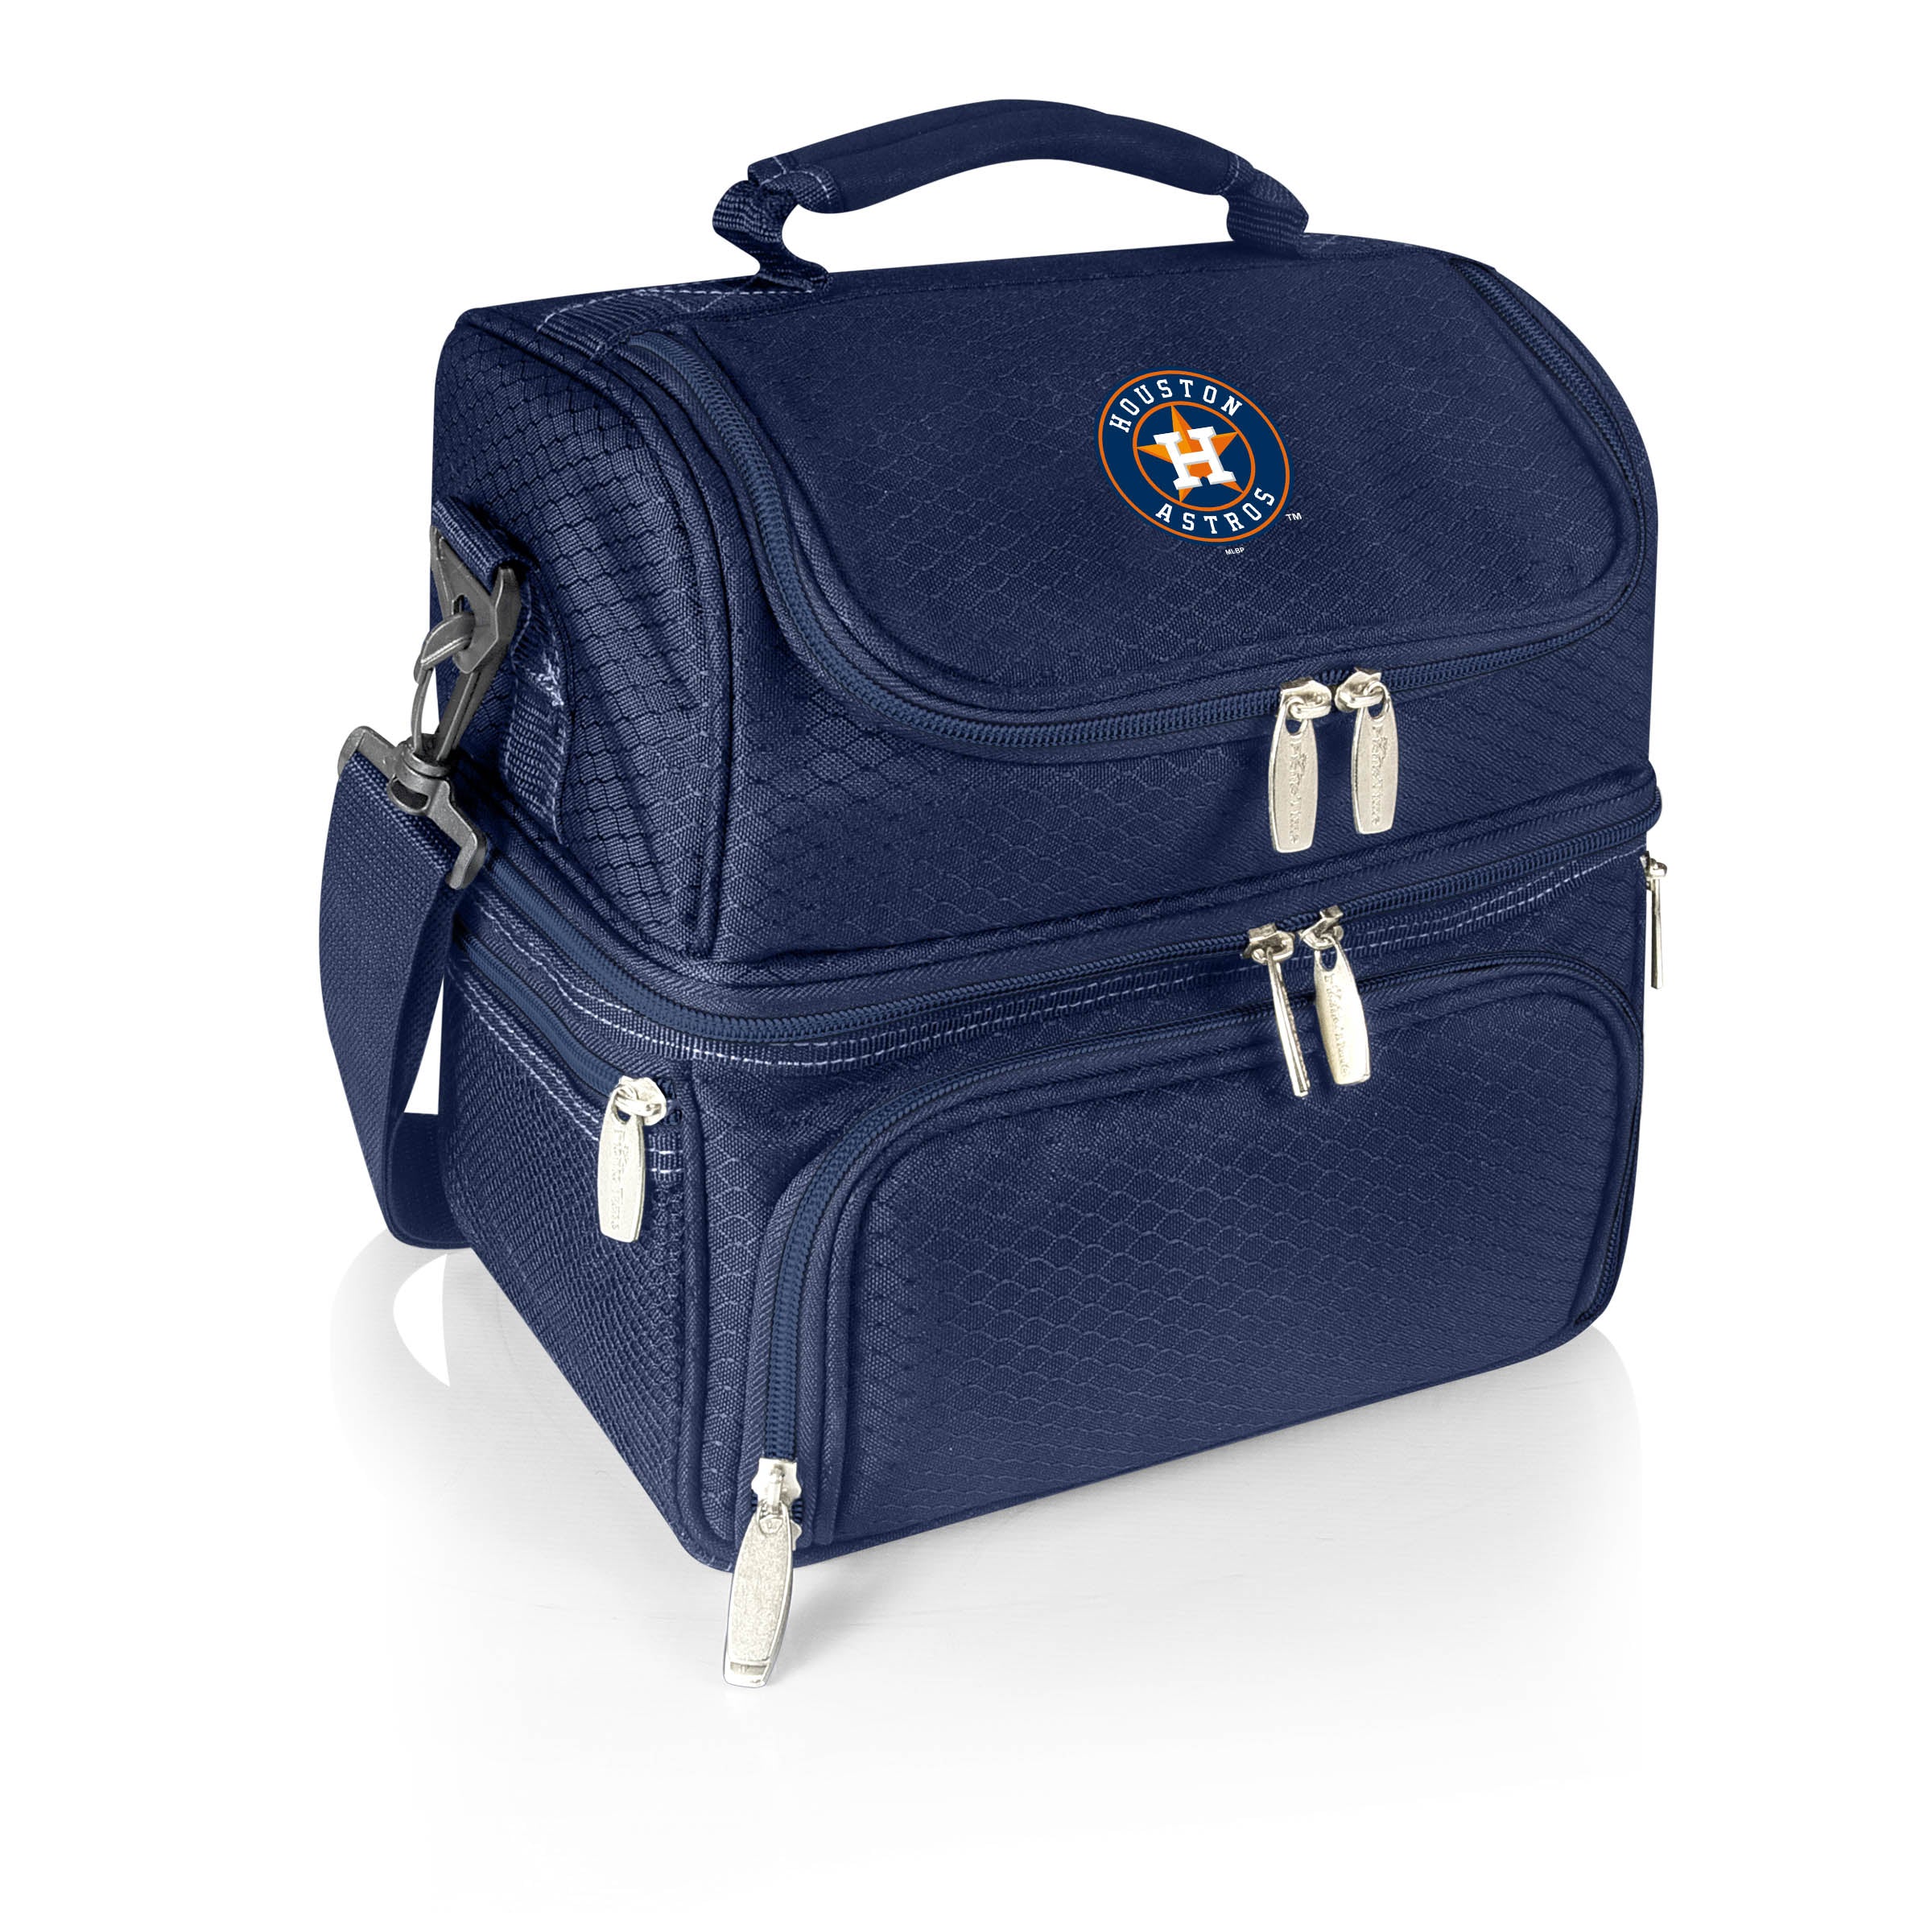 Houston Astros - Pranzo Lunch Bag Cooler with Utensils